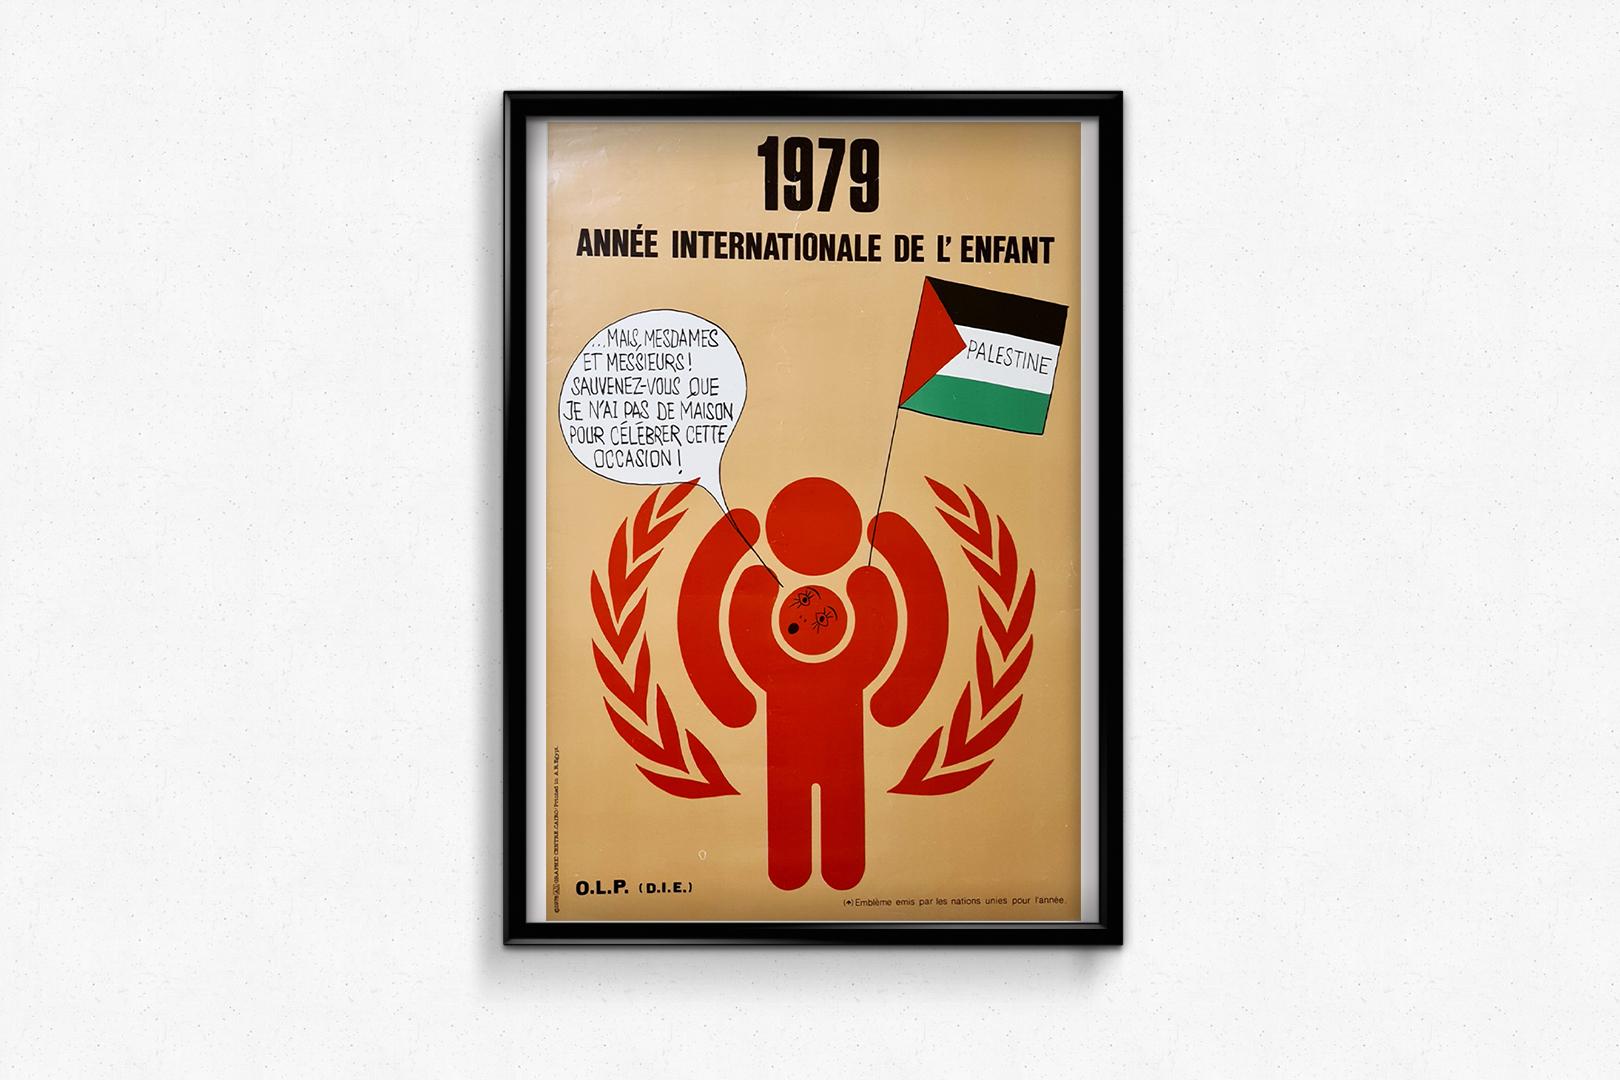 A beautiful poster celebrating the International Year of the Child 1979.

The United Nations declared 1979 to be the 